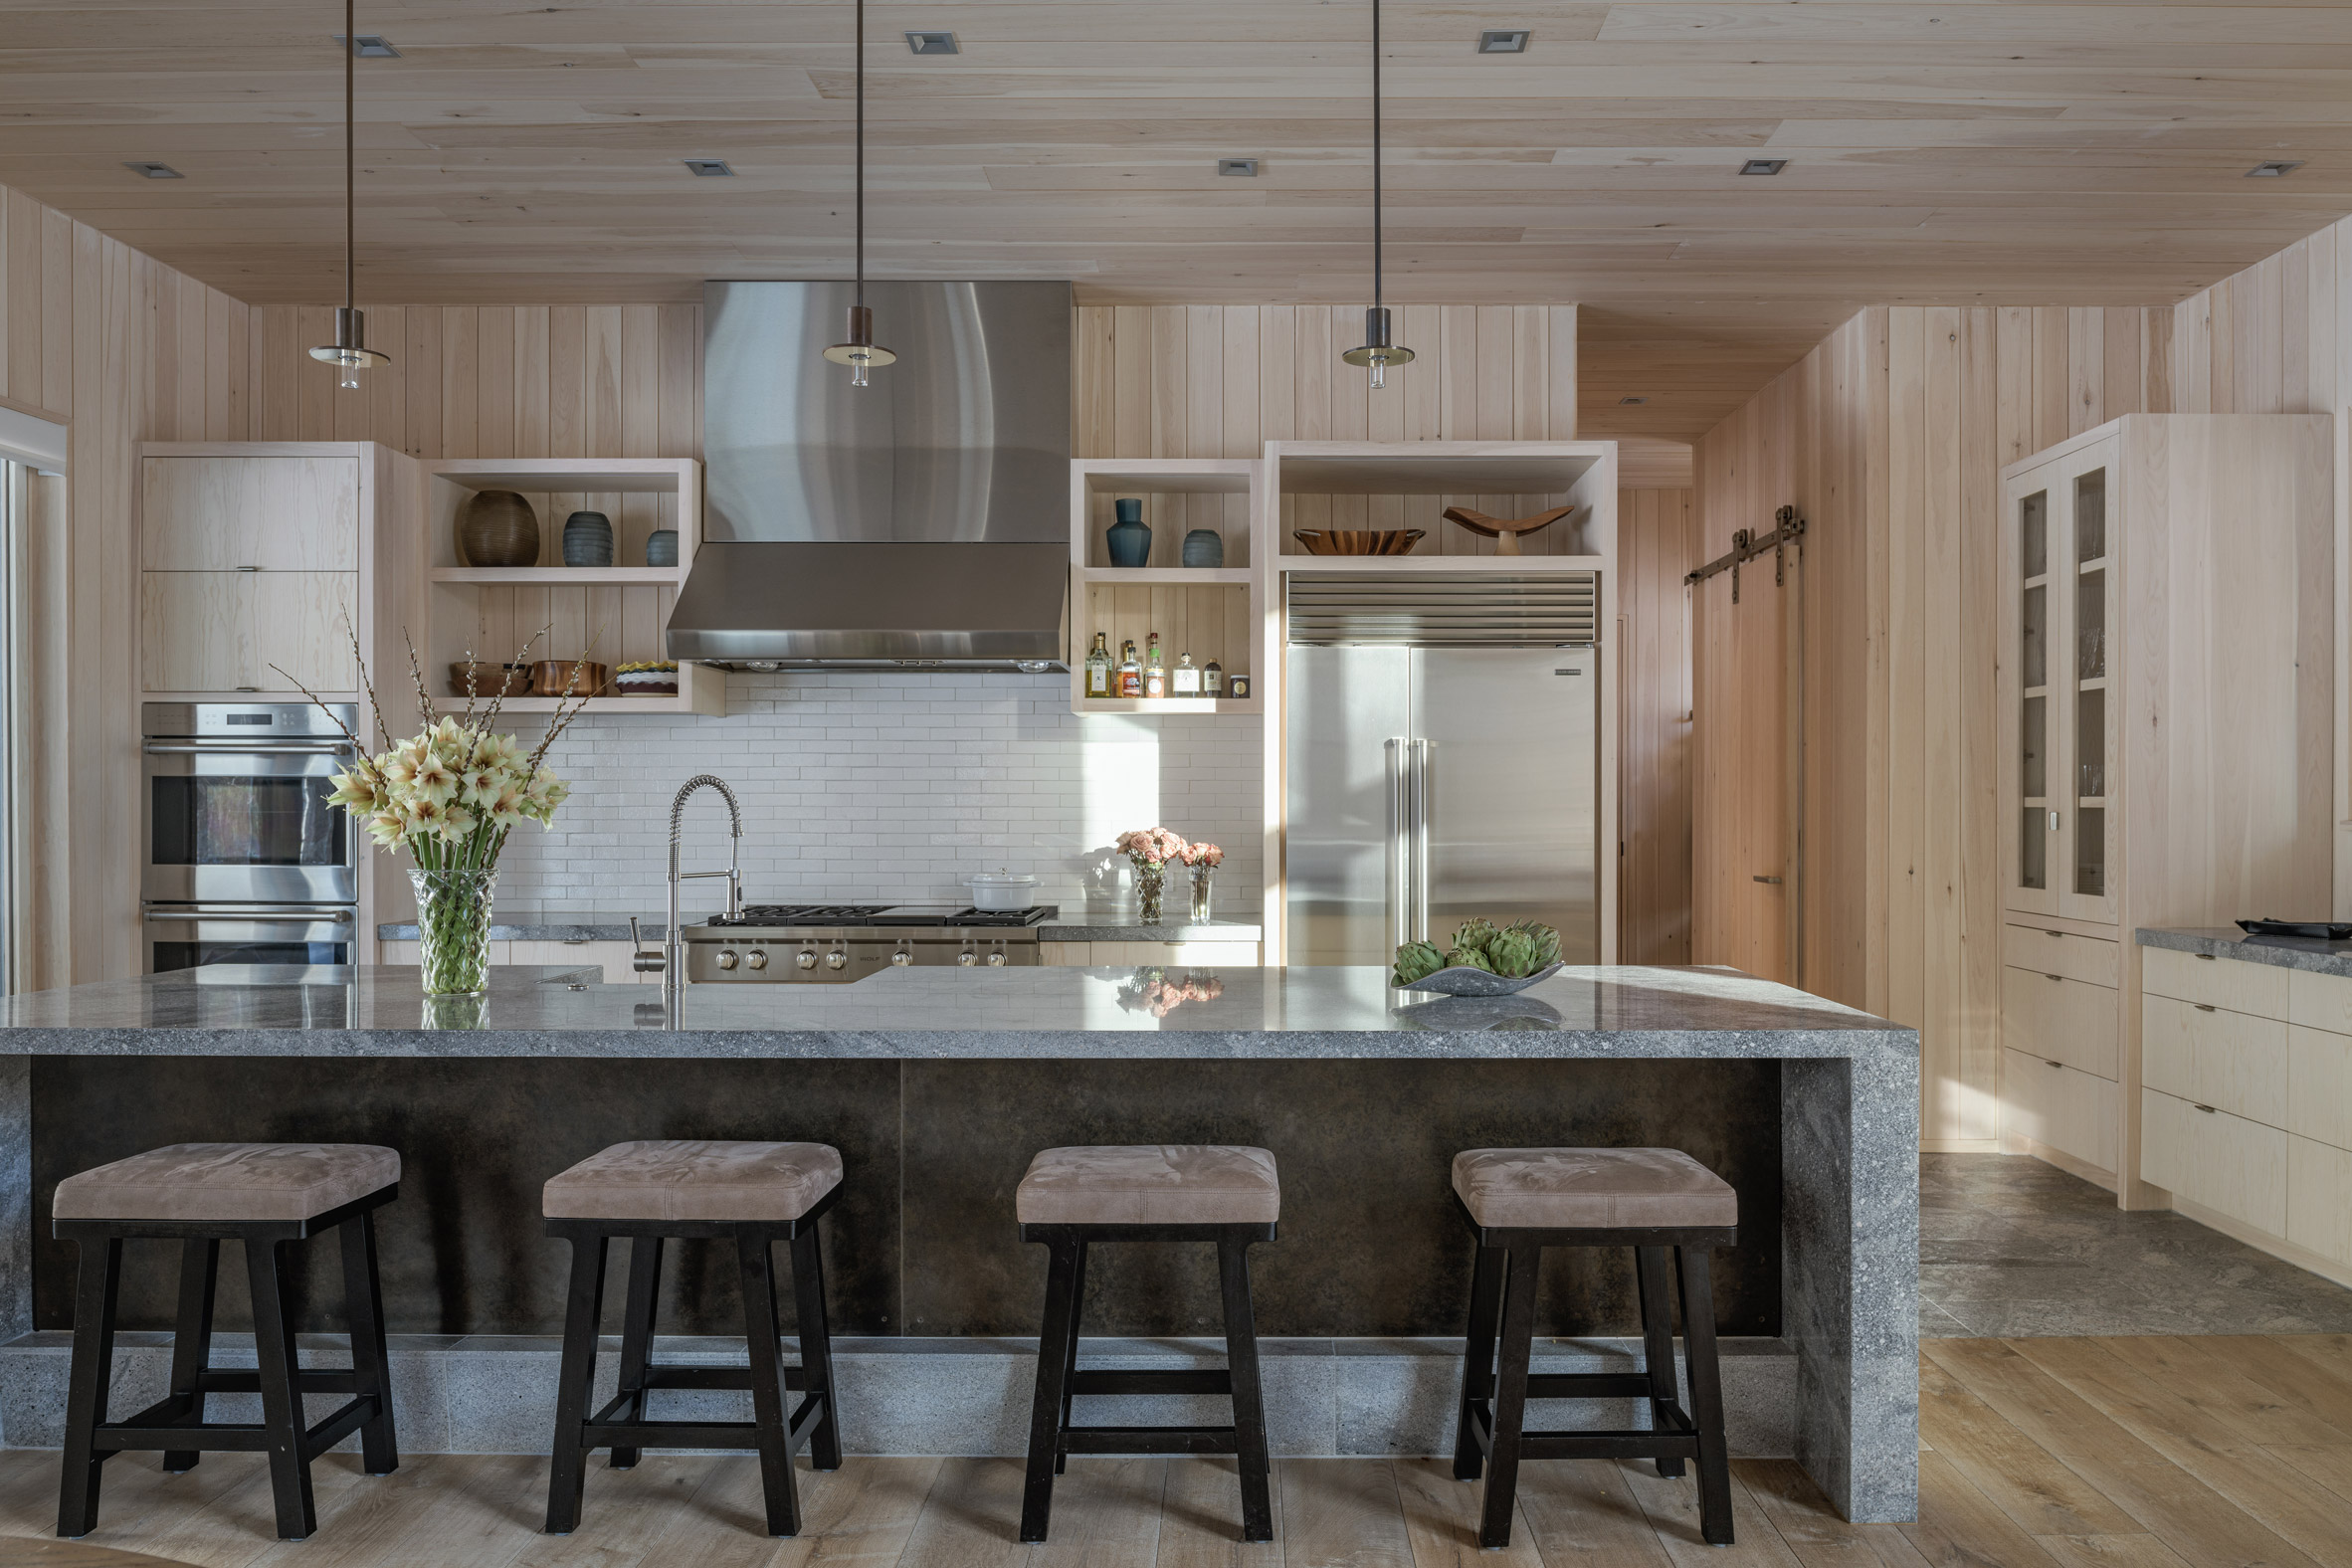 The team used earthy materials in the kitchen